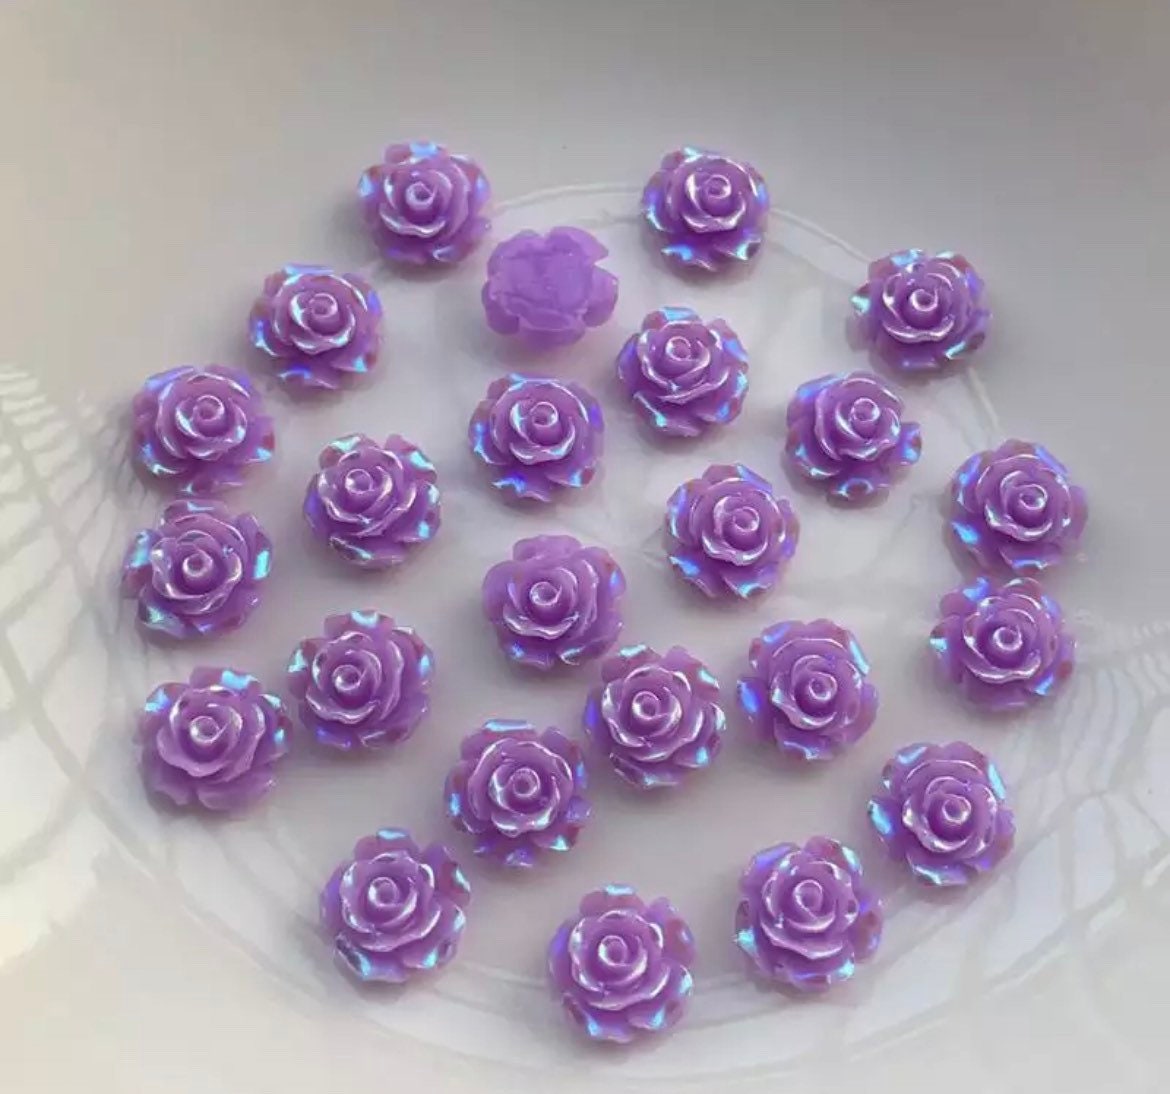 Lilac rose flower cabochon, 10mm